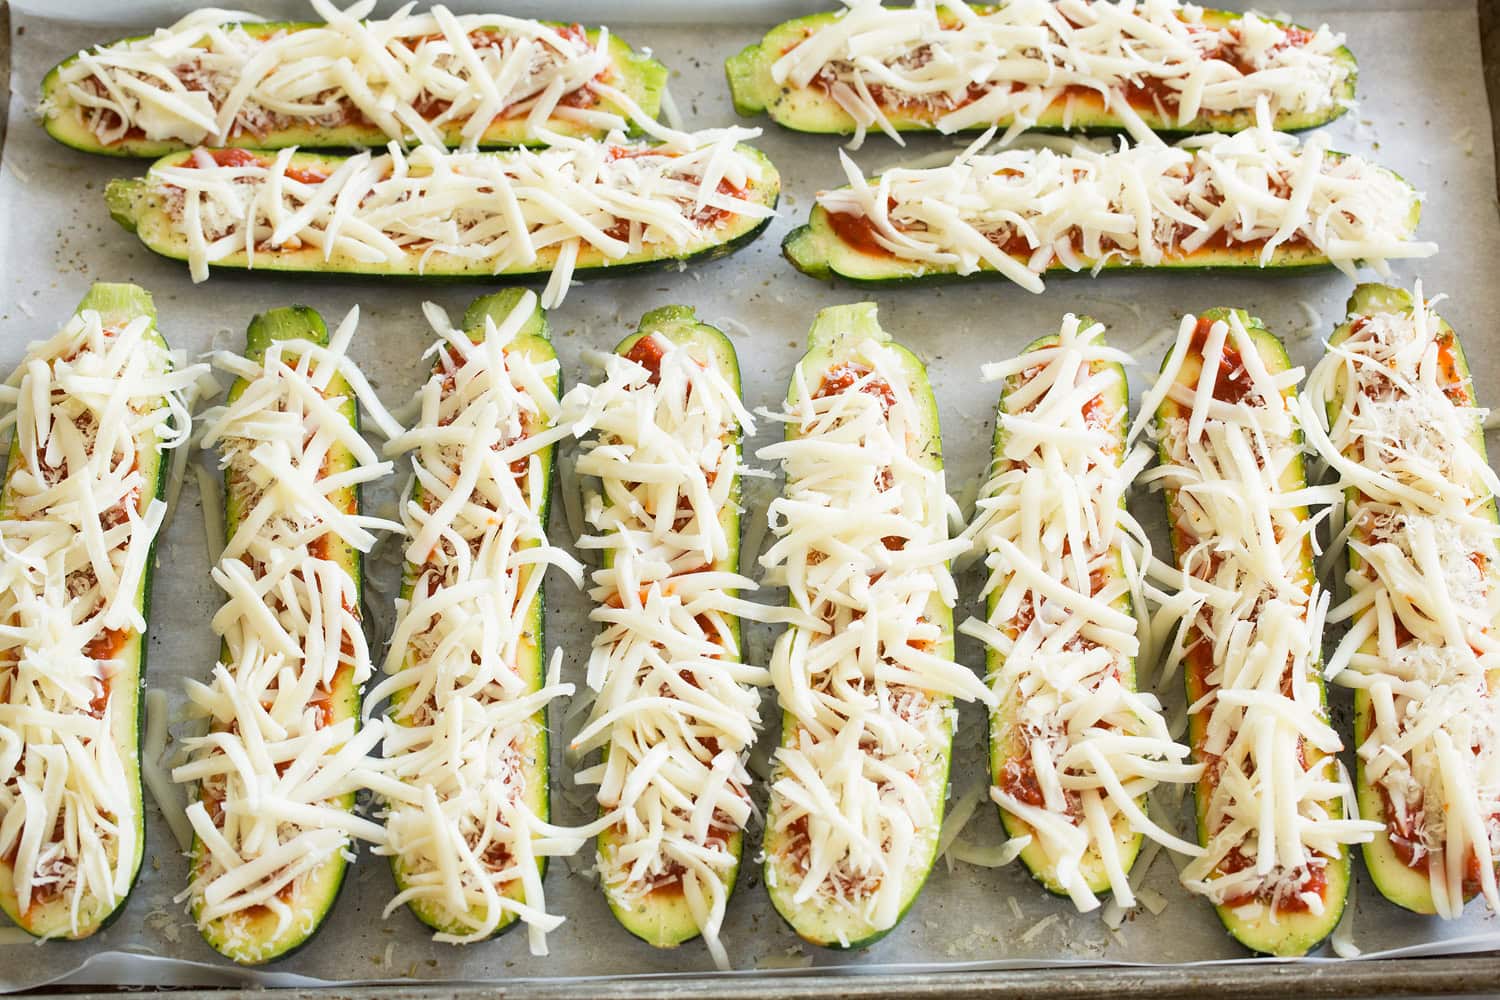 Zucchini pizza boats with shredded cheese on top.